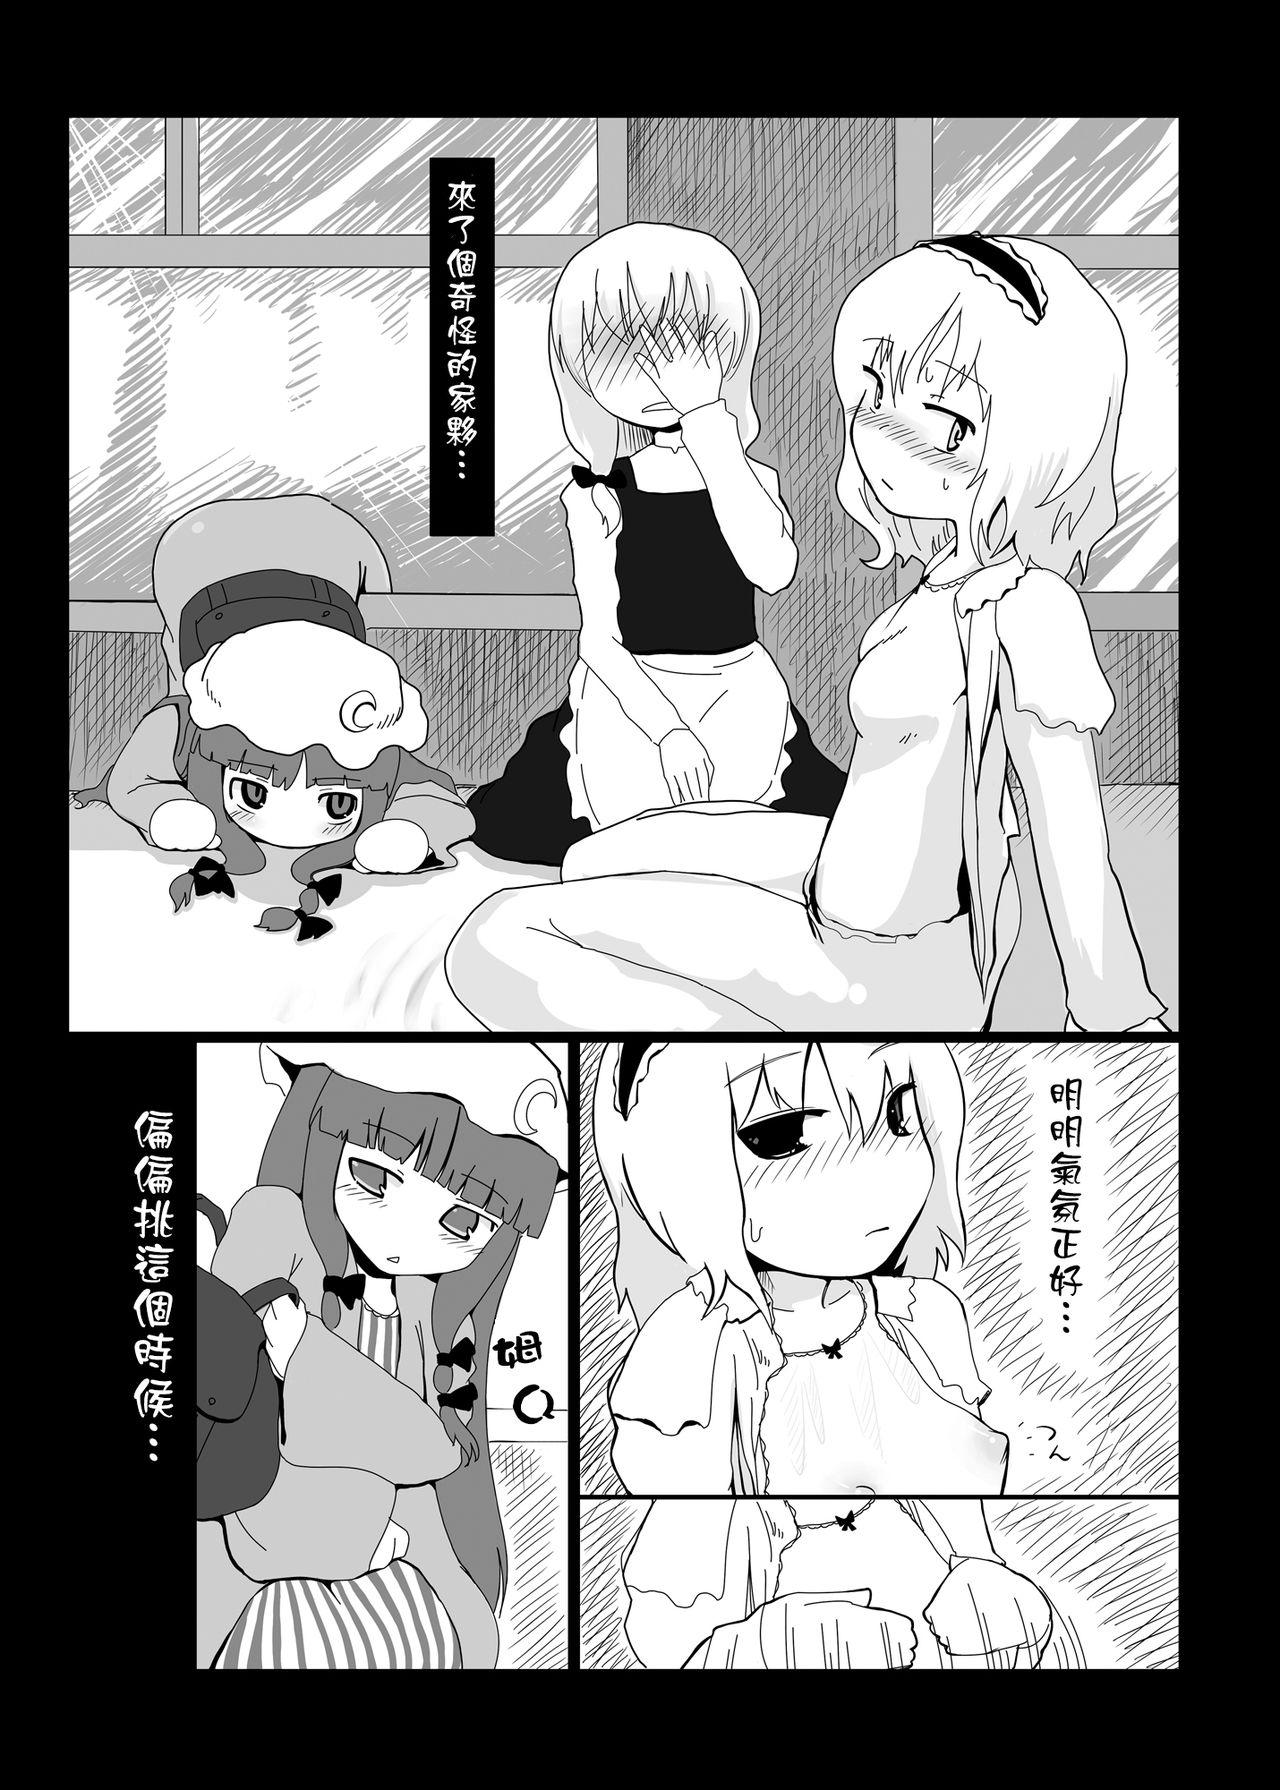 Exhibition Touhou Ero Atsume. - Touhou project Gay 3some - Page 9